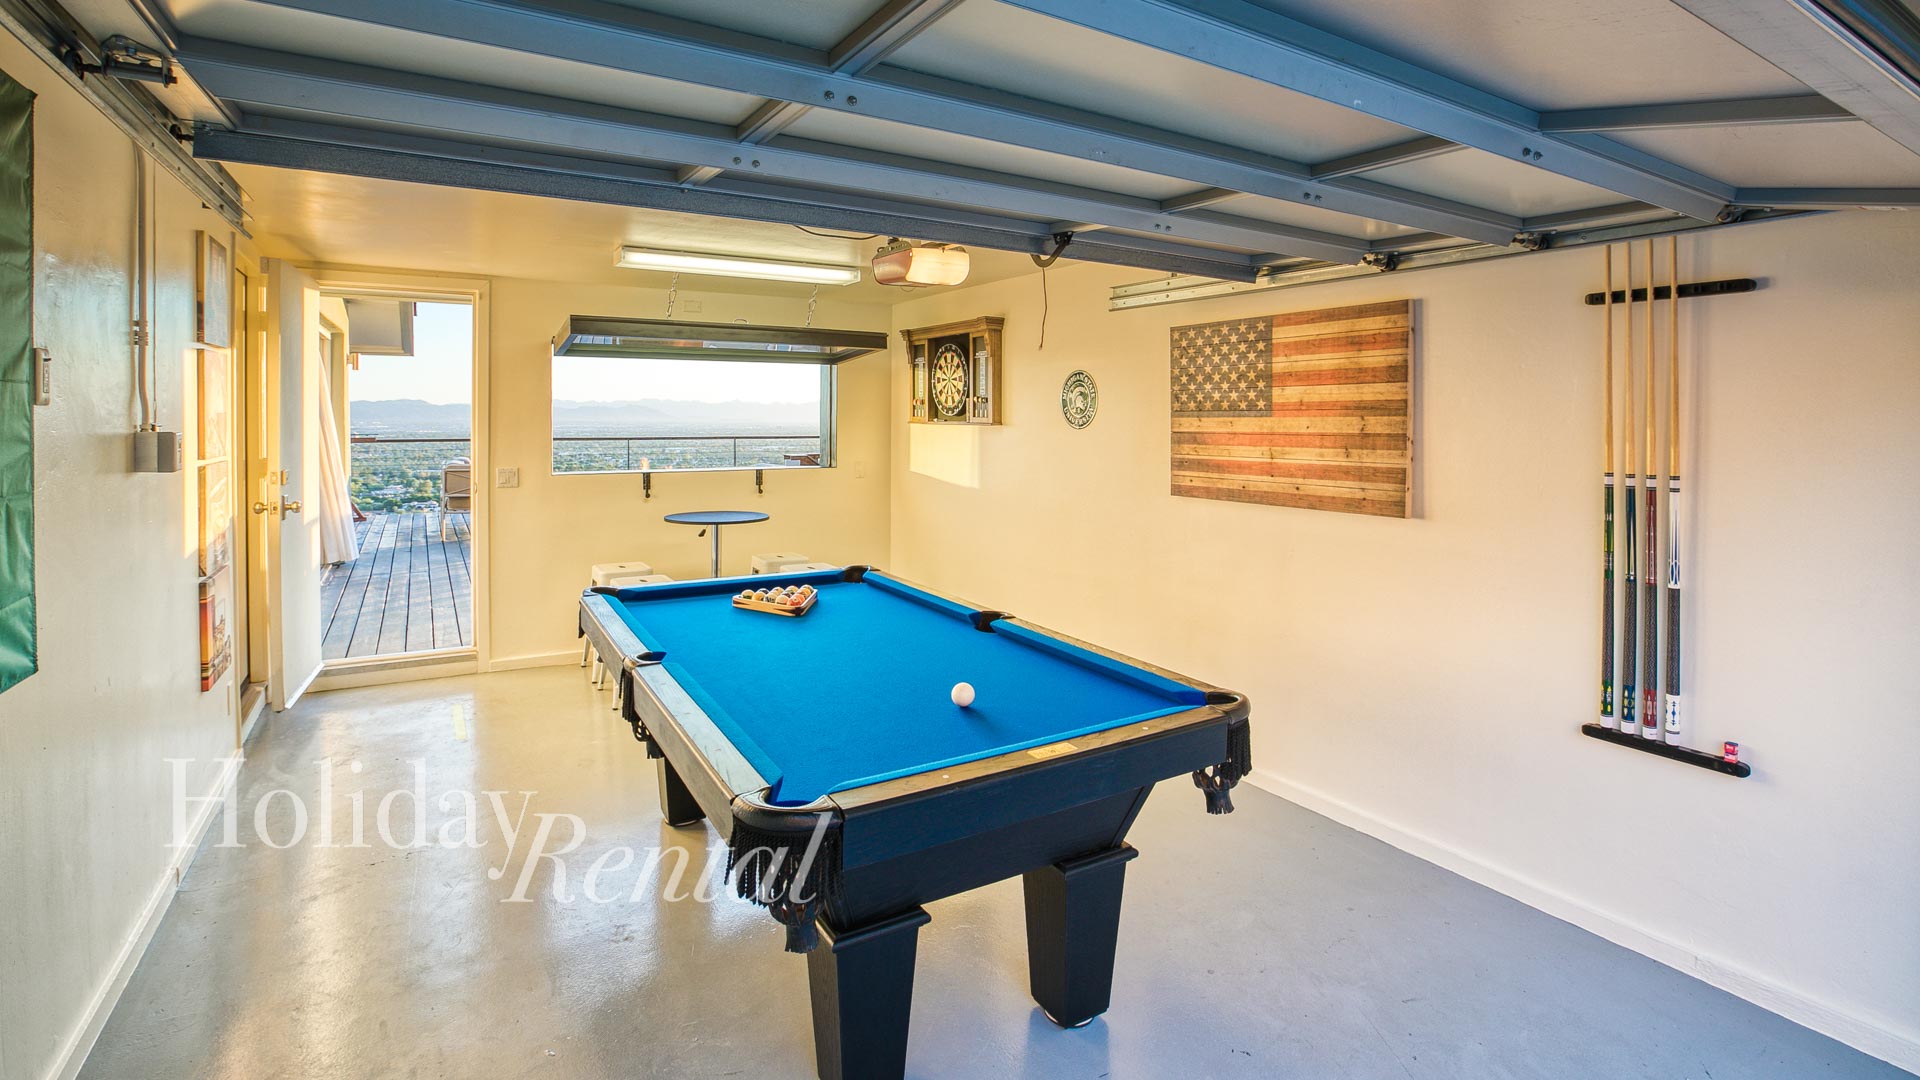 Game room with billiards table and darts